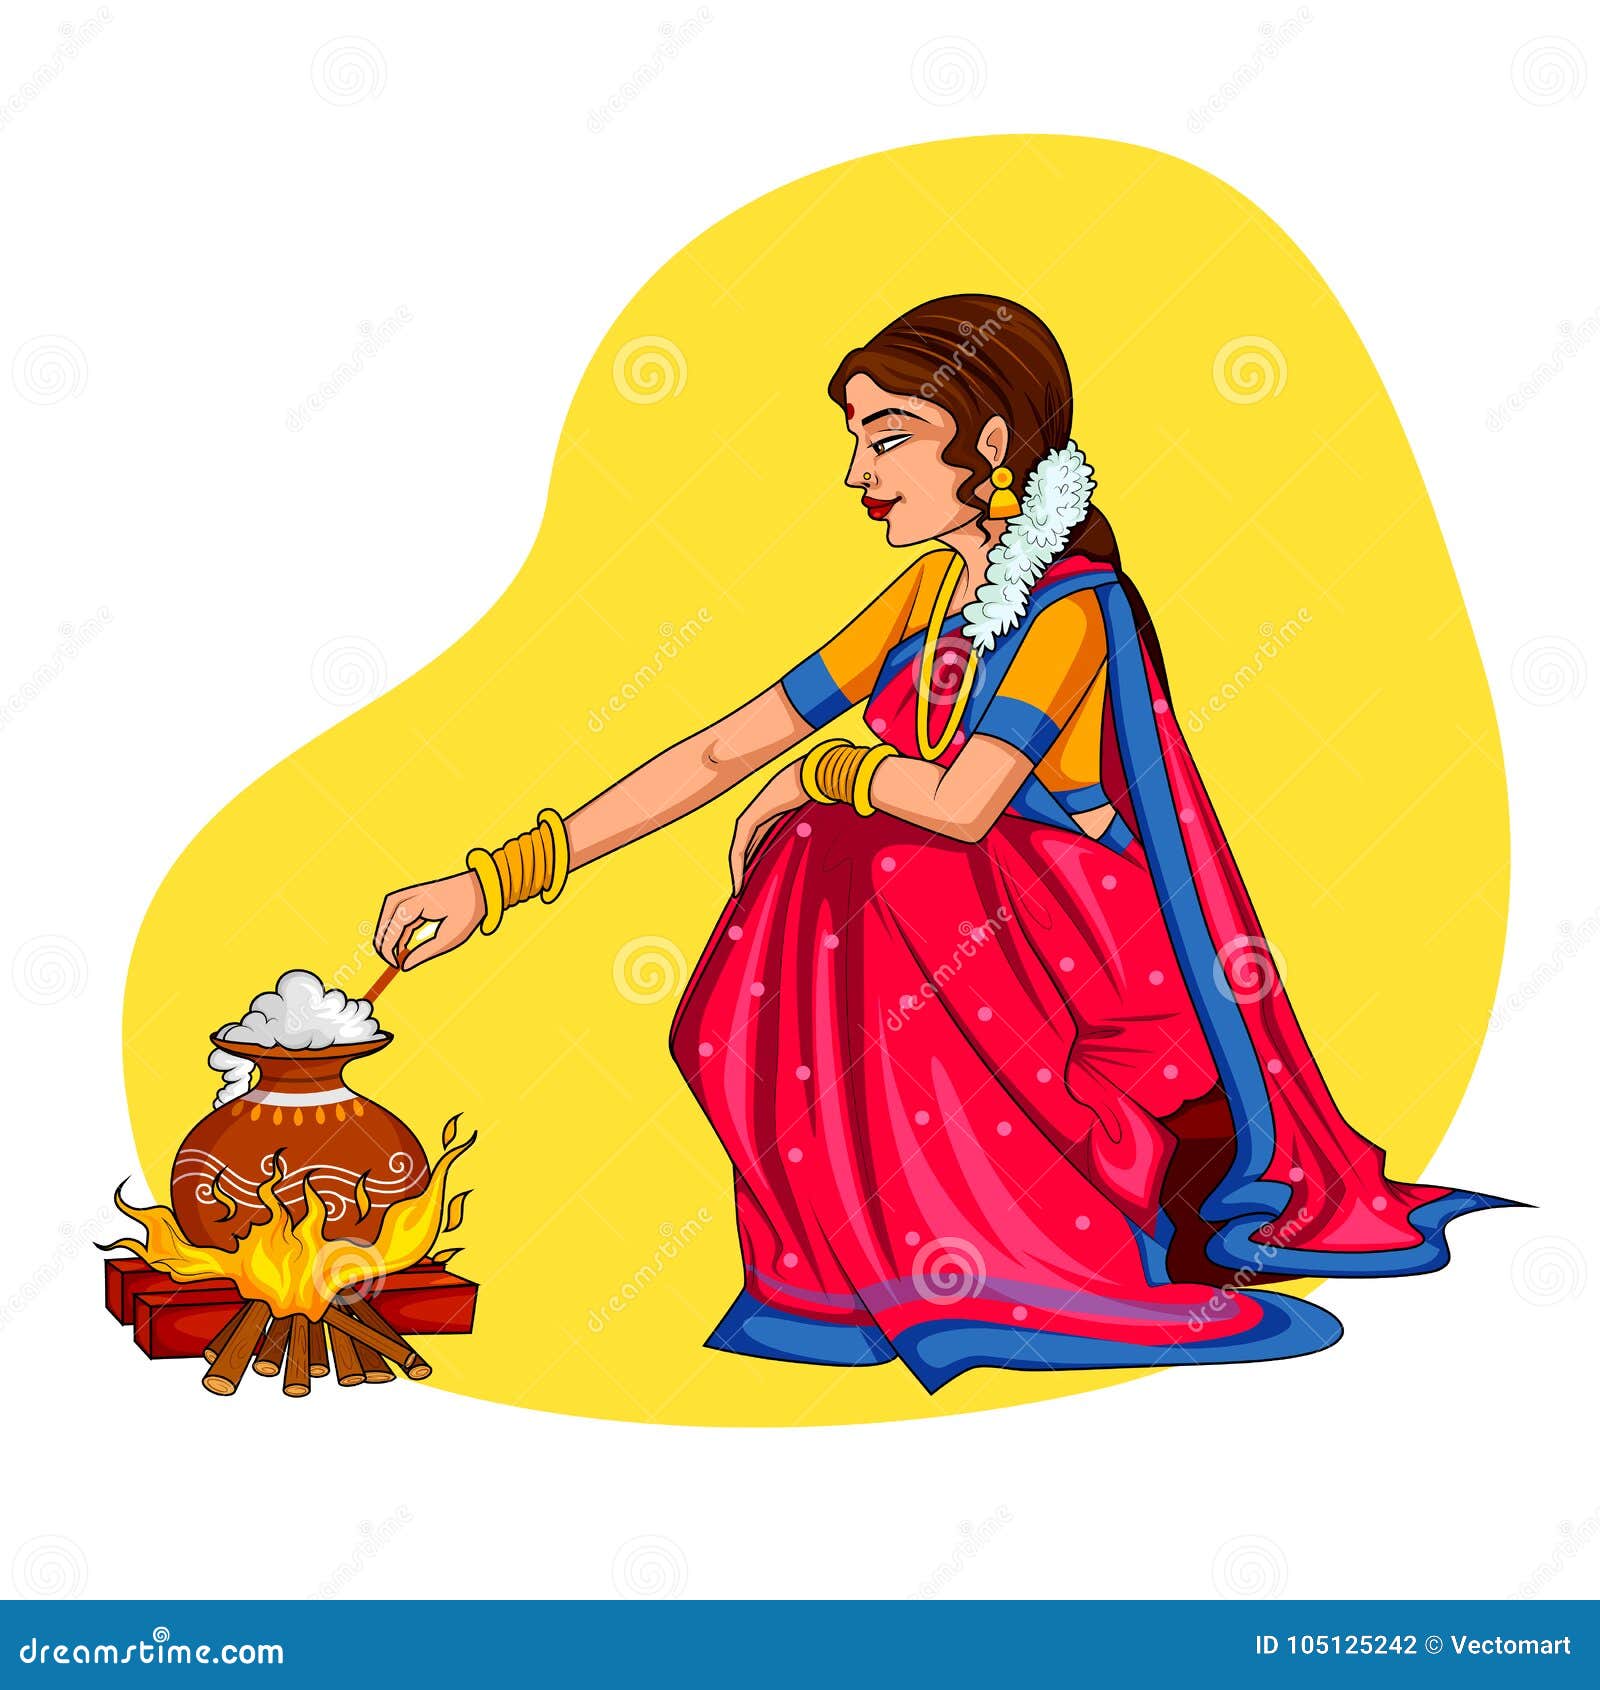 Happy Pongal Holiday Harvest Festival of Tamil Nadu South India Greeting  Background Stock Vector - Illustration of pongal, festival: 105125242